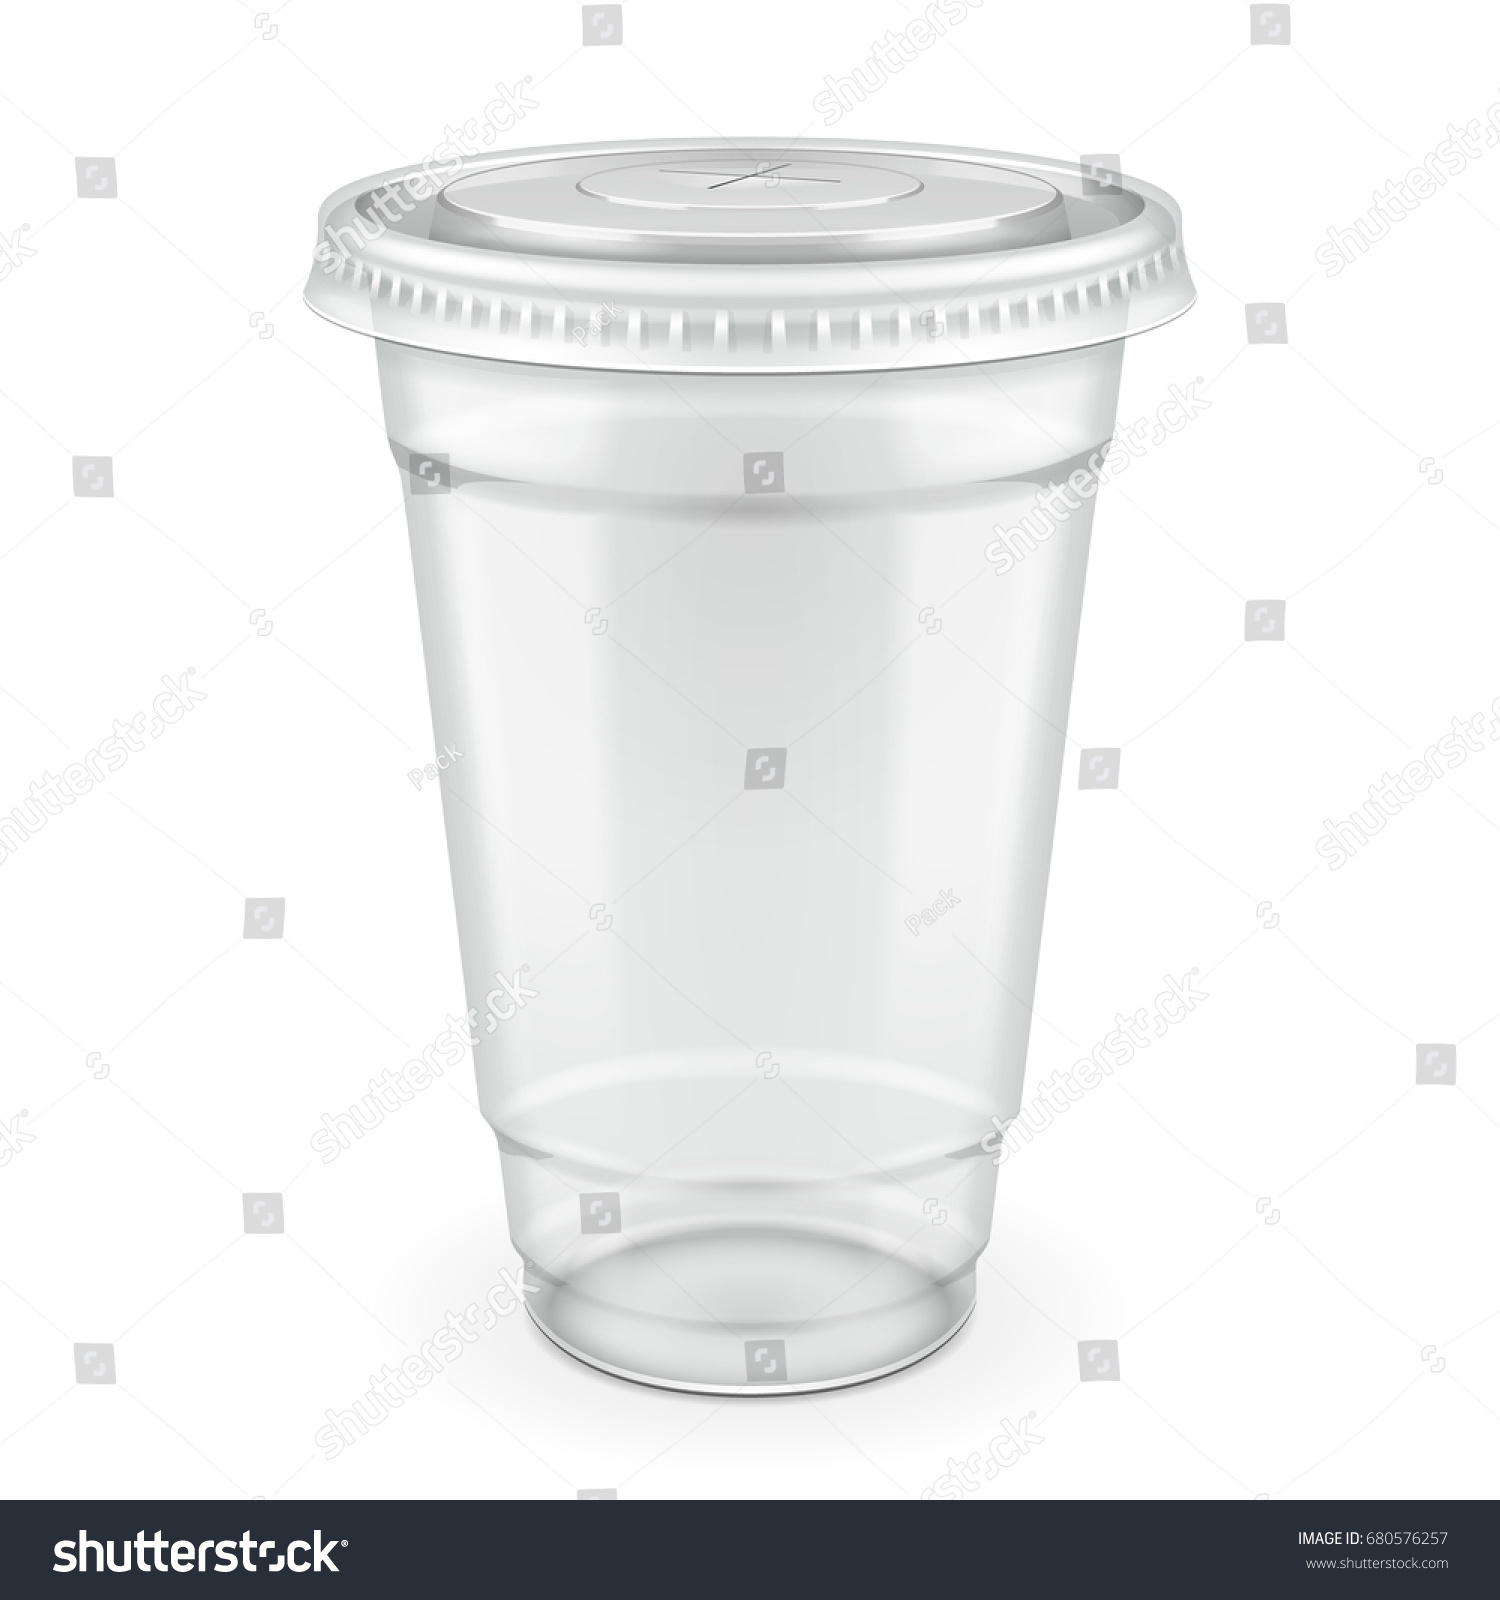 SVG of Mockup Empty Disposable Plastic Cup With Lid. Transparent Container For Cold, Hot Drink. Juice Fresh, Coffee, Tea, Milkshake. Illustration Isolated On White Background Mock Up Template Your Design. svg